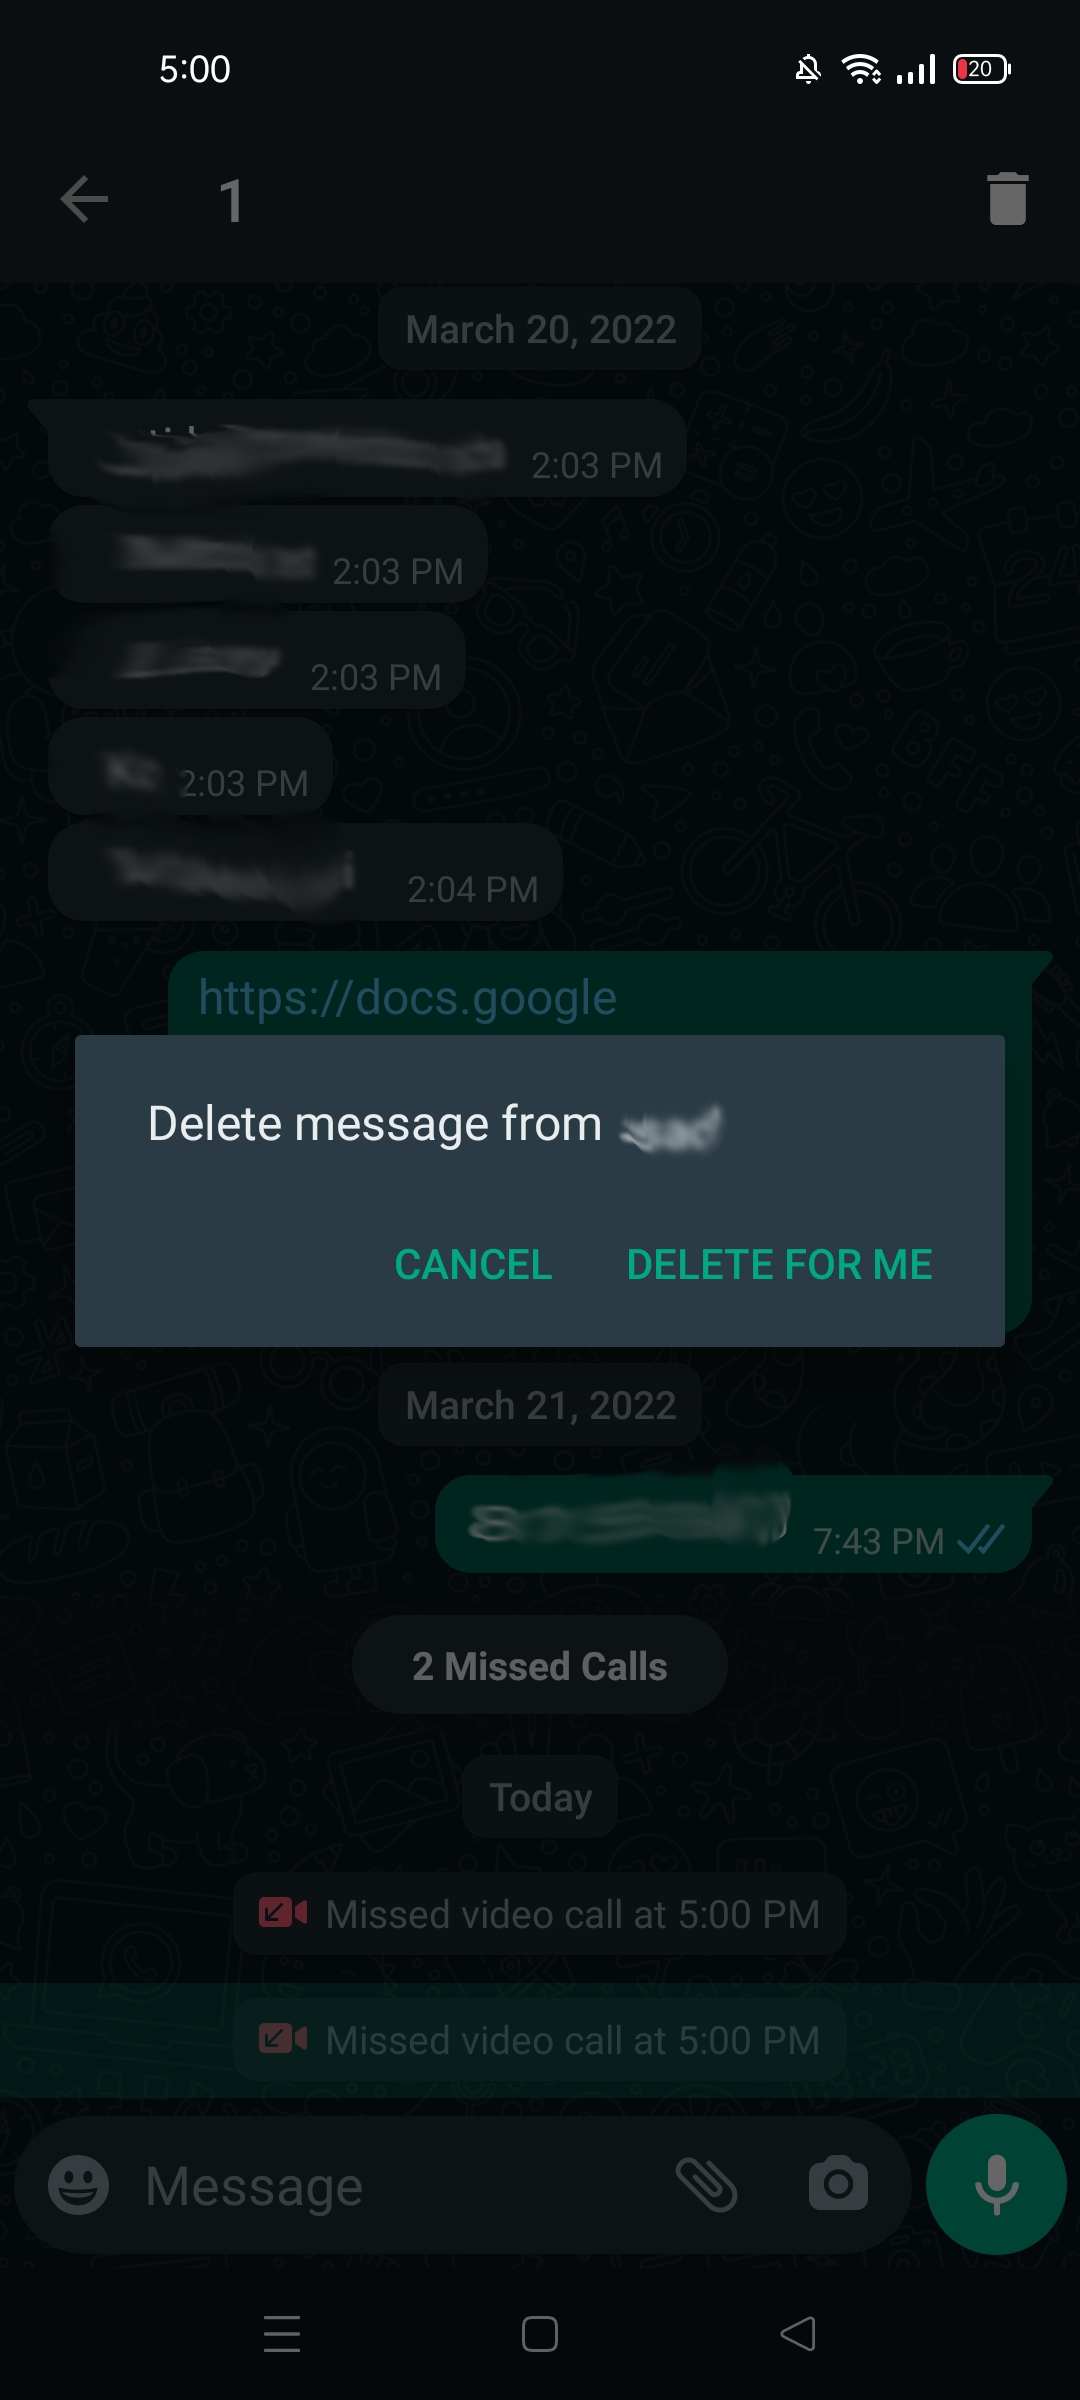 Delete missed calls in WhatsApp from chatbox in Android